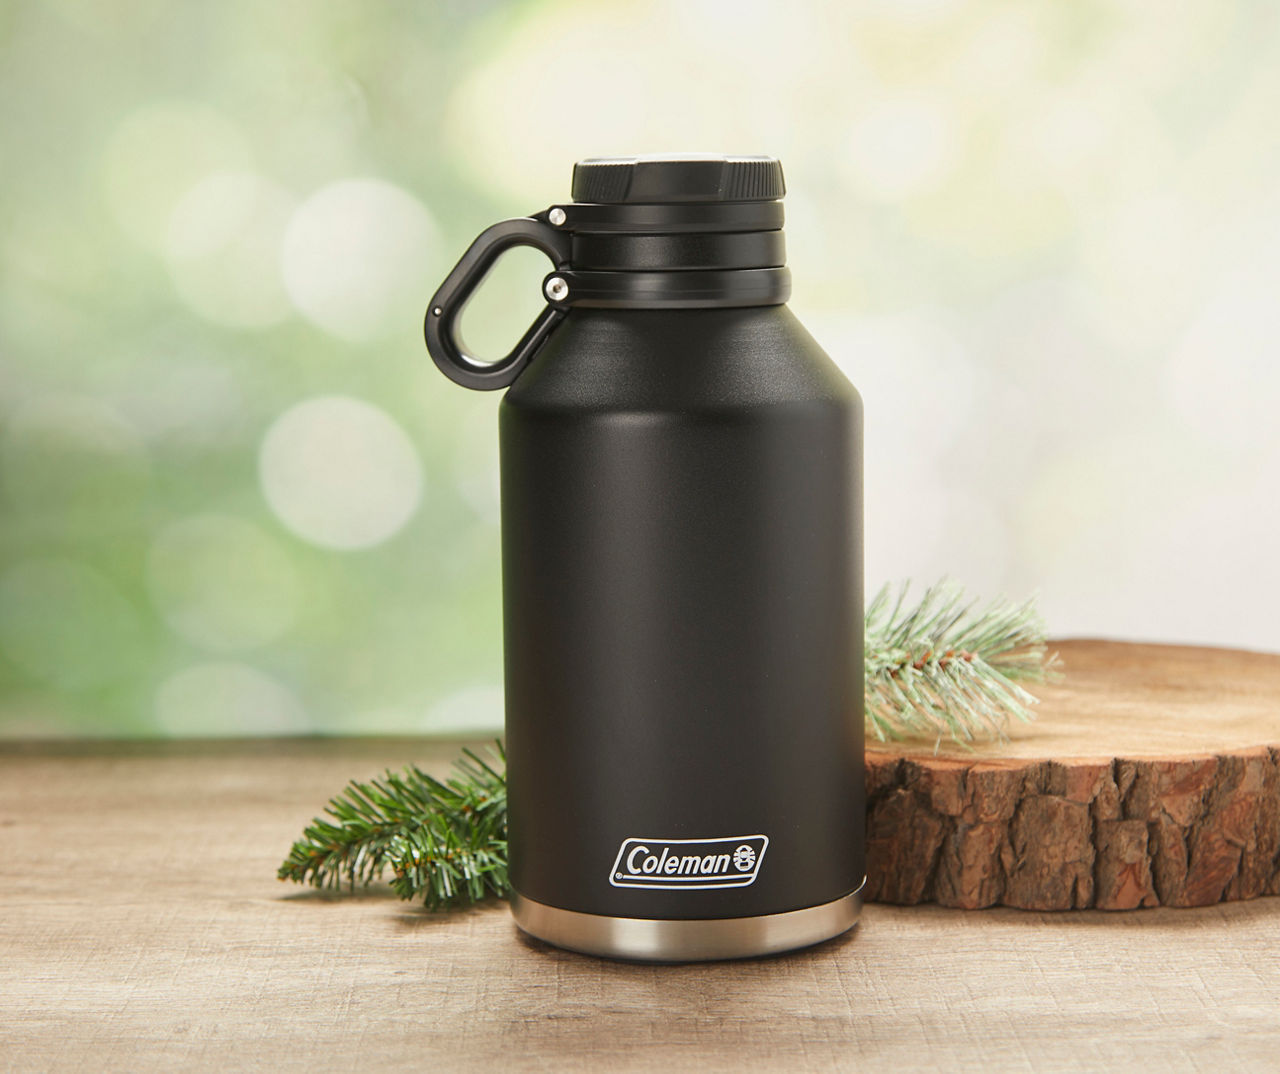 Thermos Insulated Water Jug, Black, 64 oz